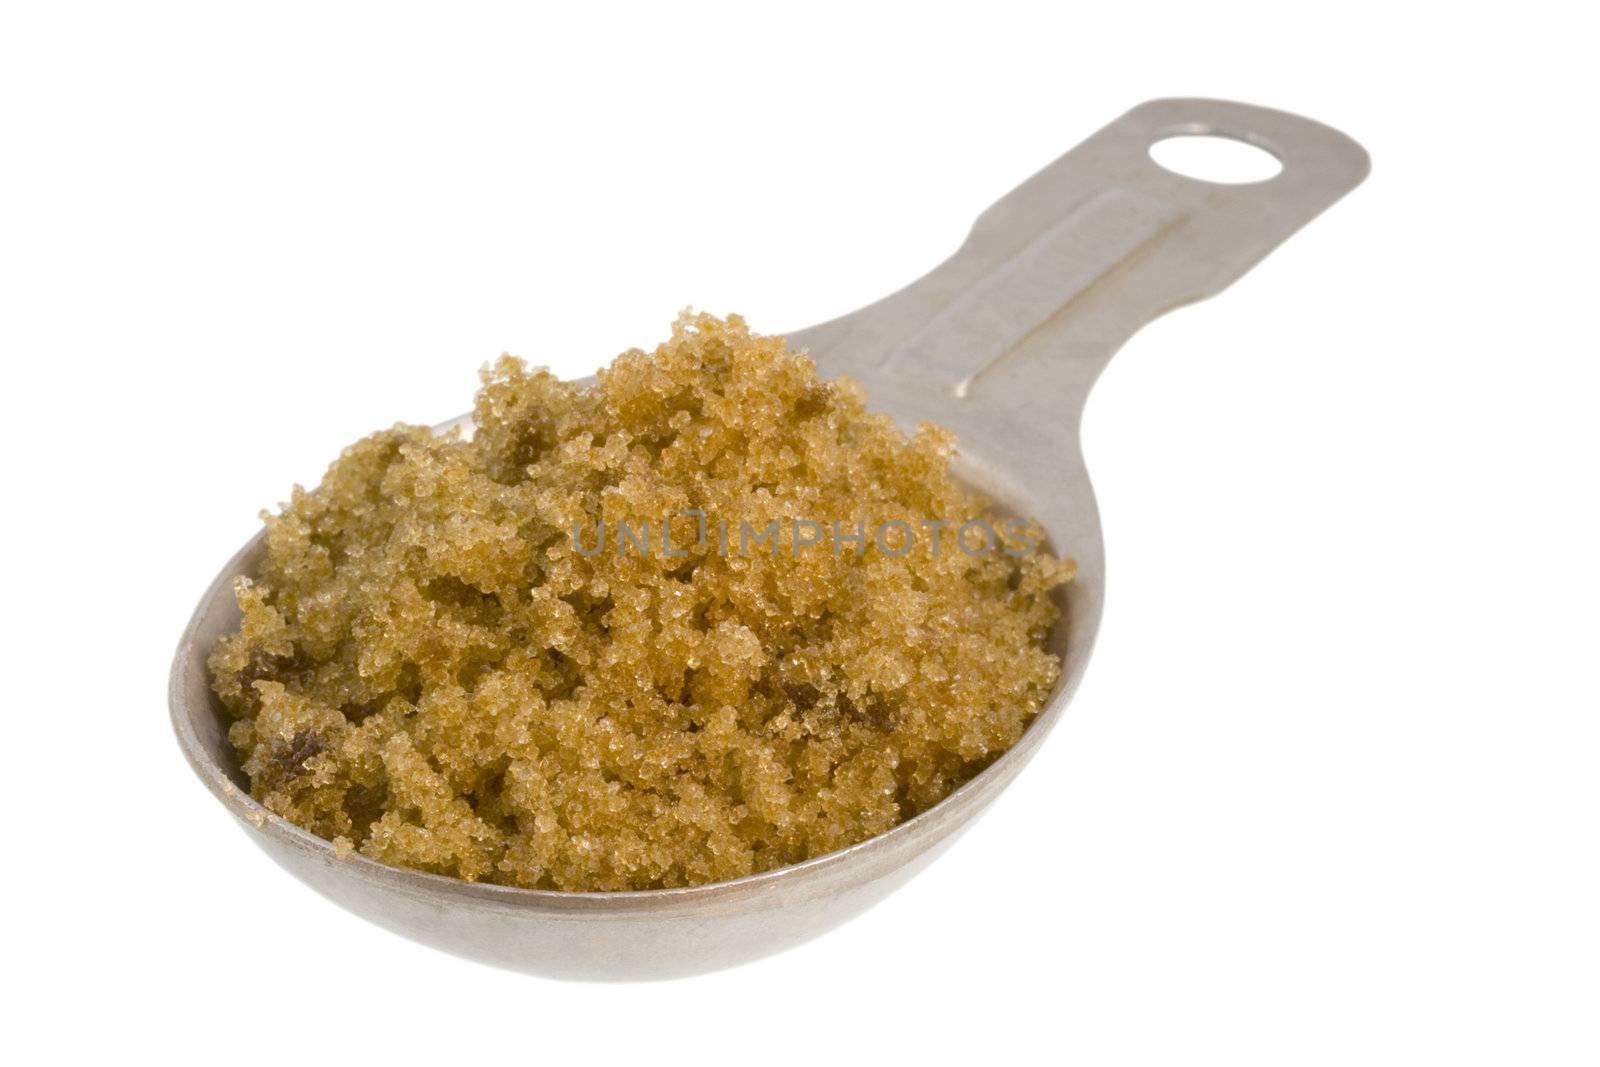 Measuring tablespoon of brown sugar on white